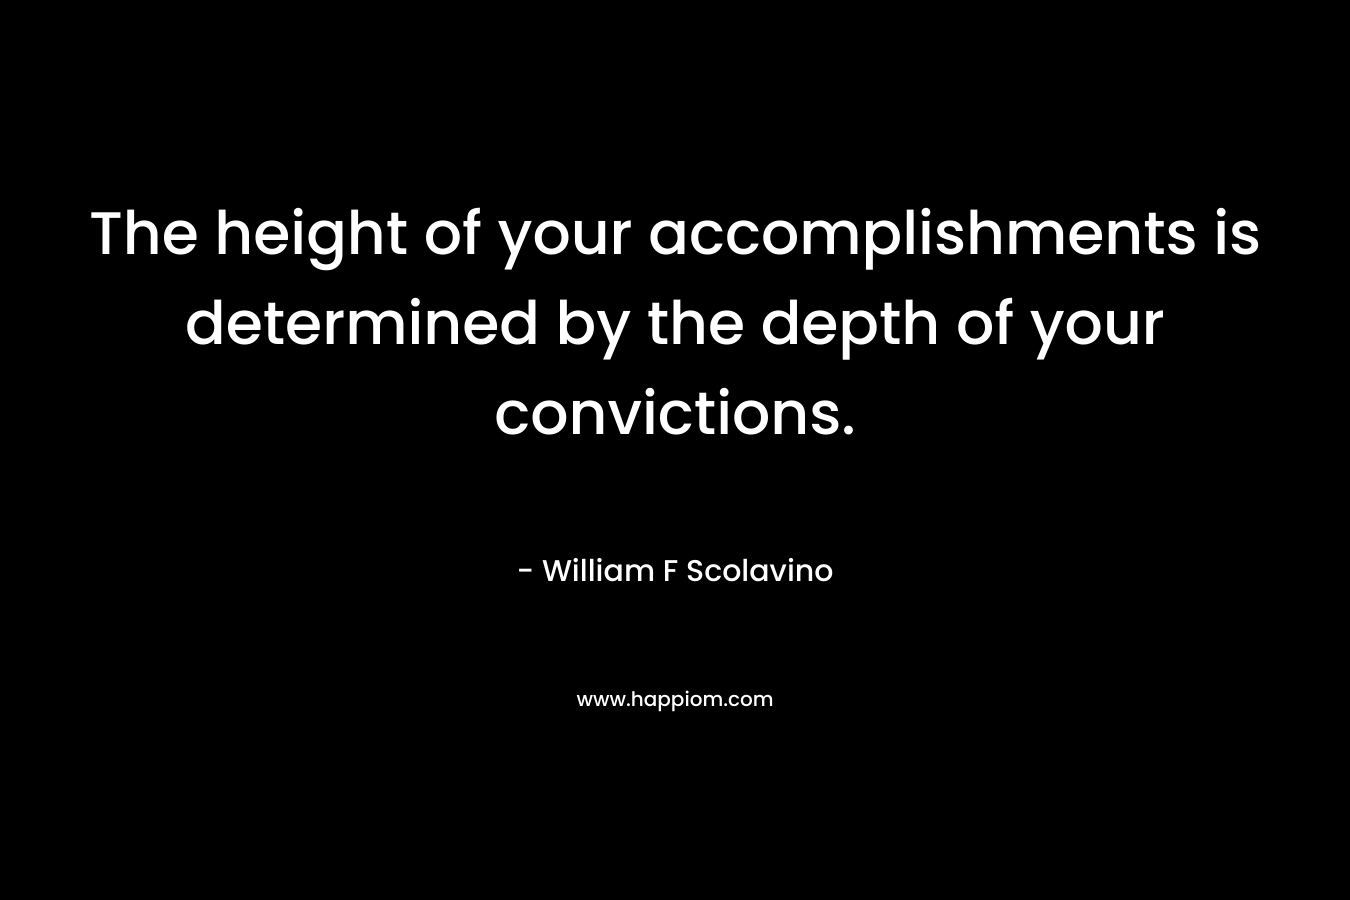 The height of your accomplishments is determined by the depth of your convictions.